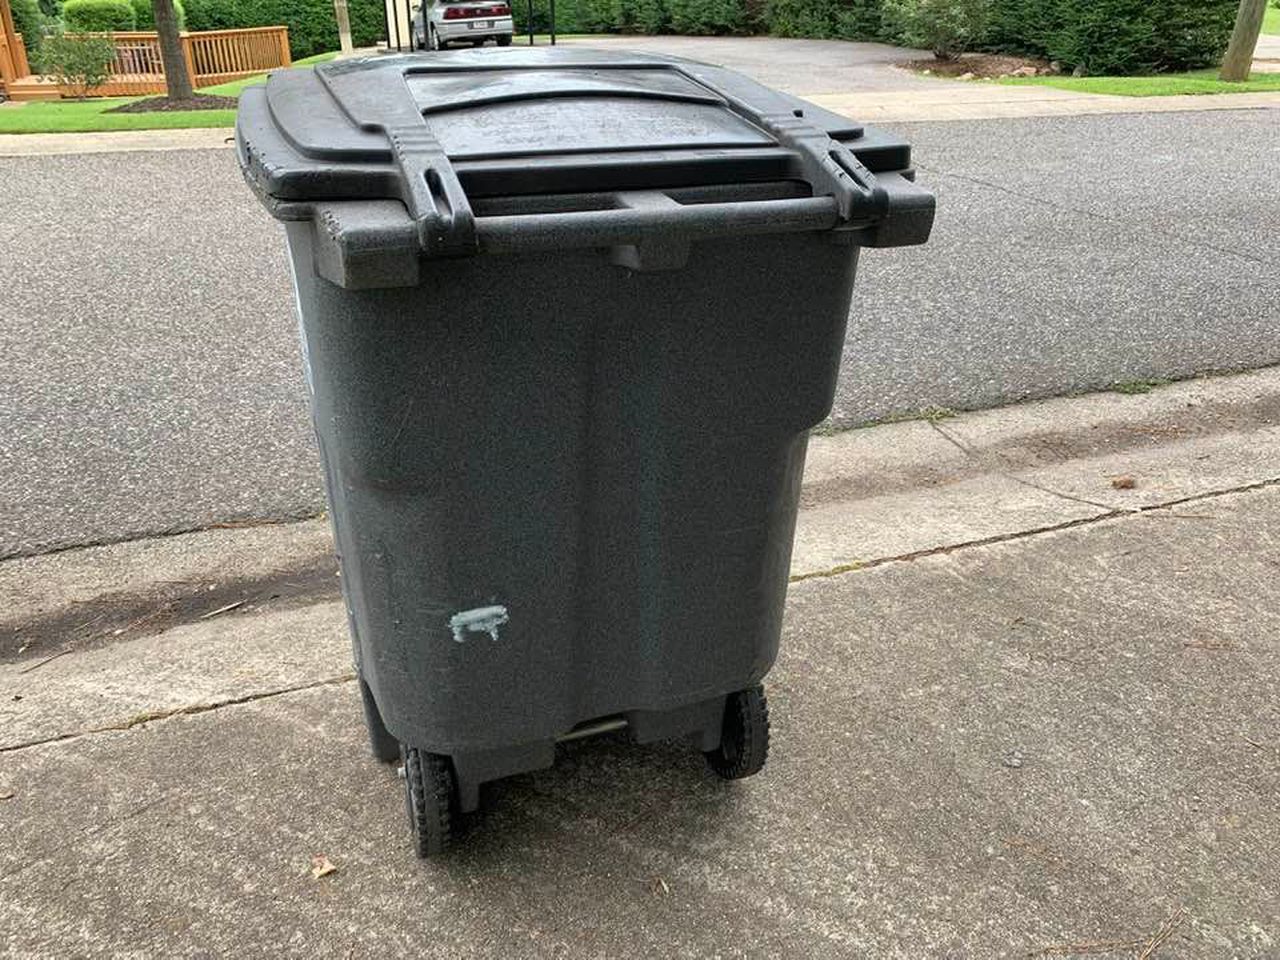 The City of Birmingham has approved a new uniform trash bin system « The  Official Website for the City of Birmingham, Alabama